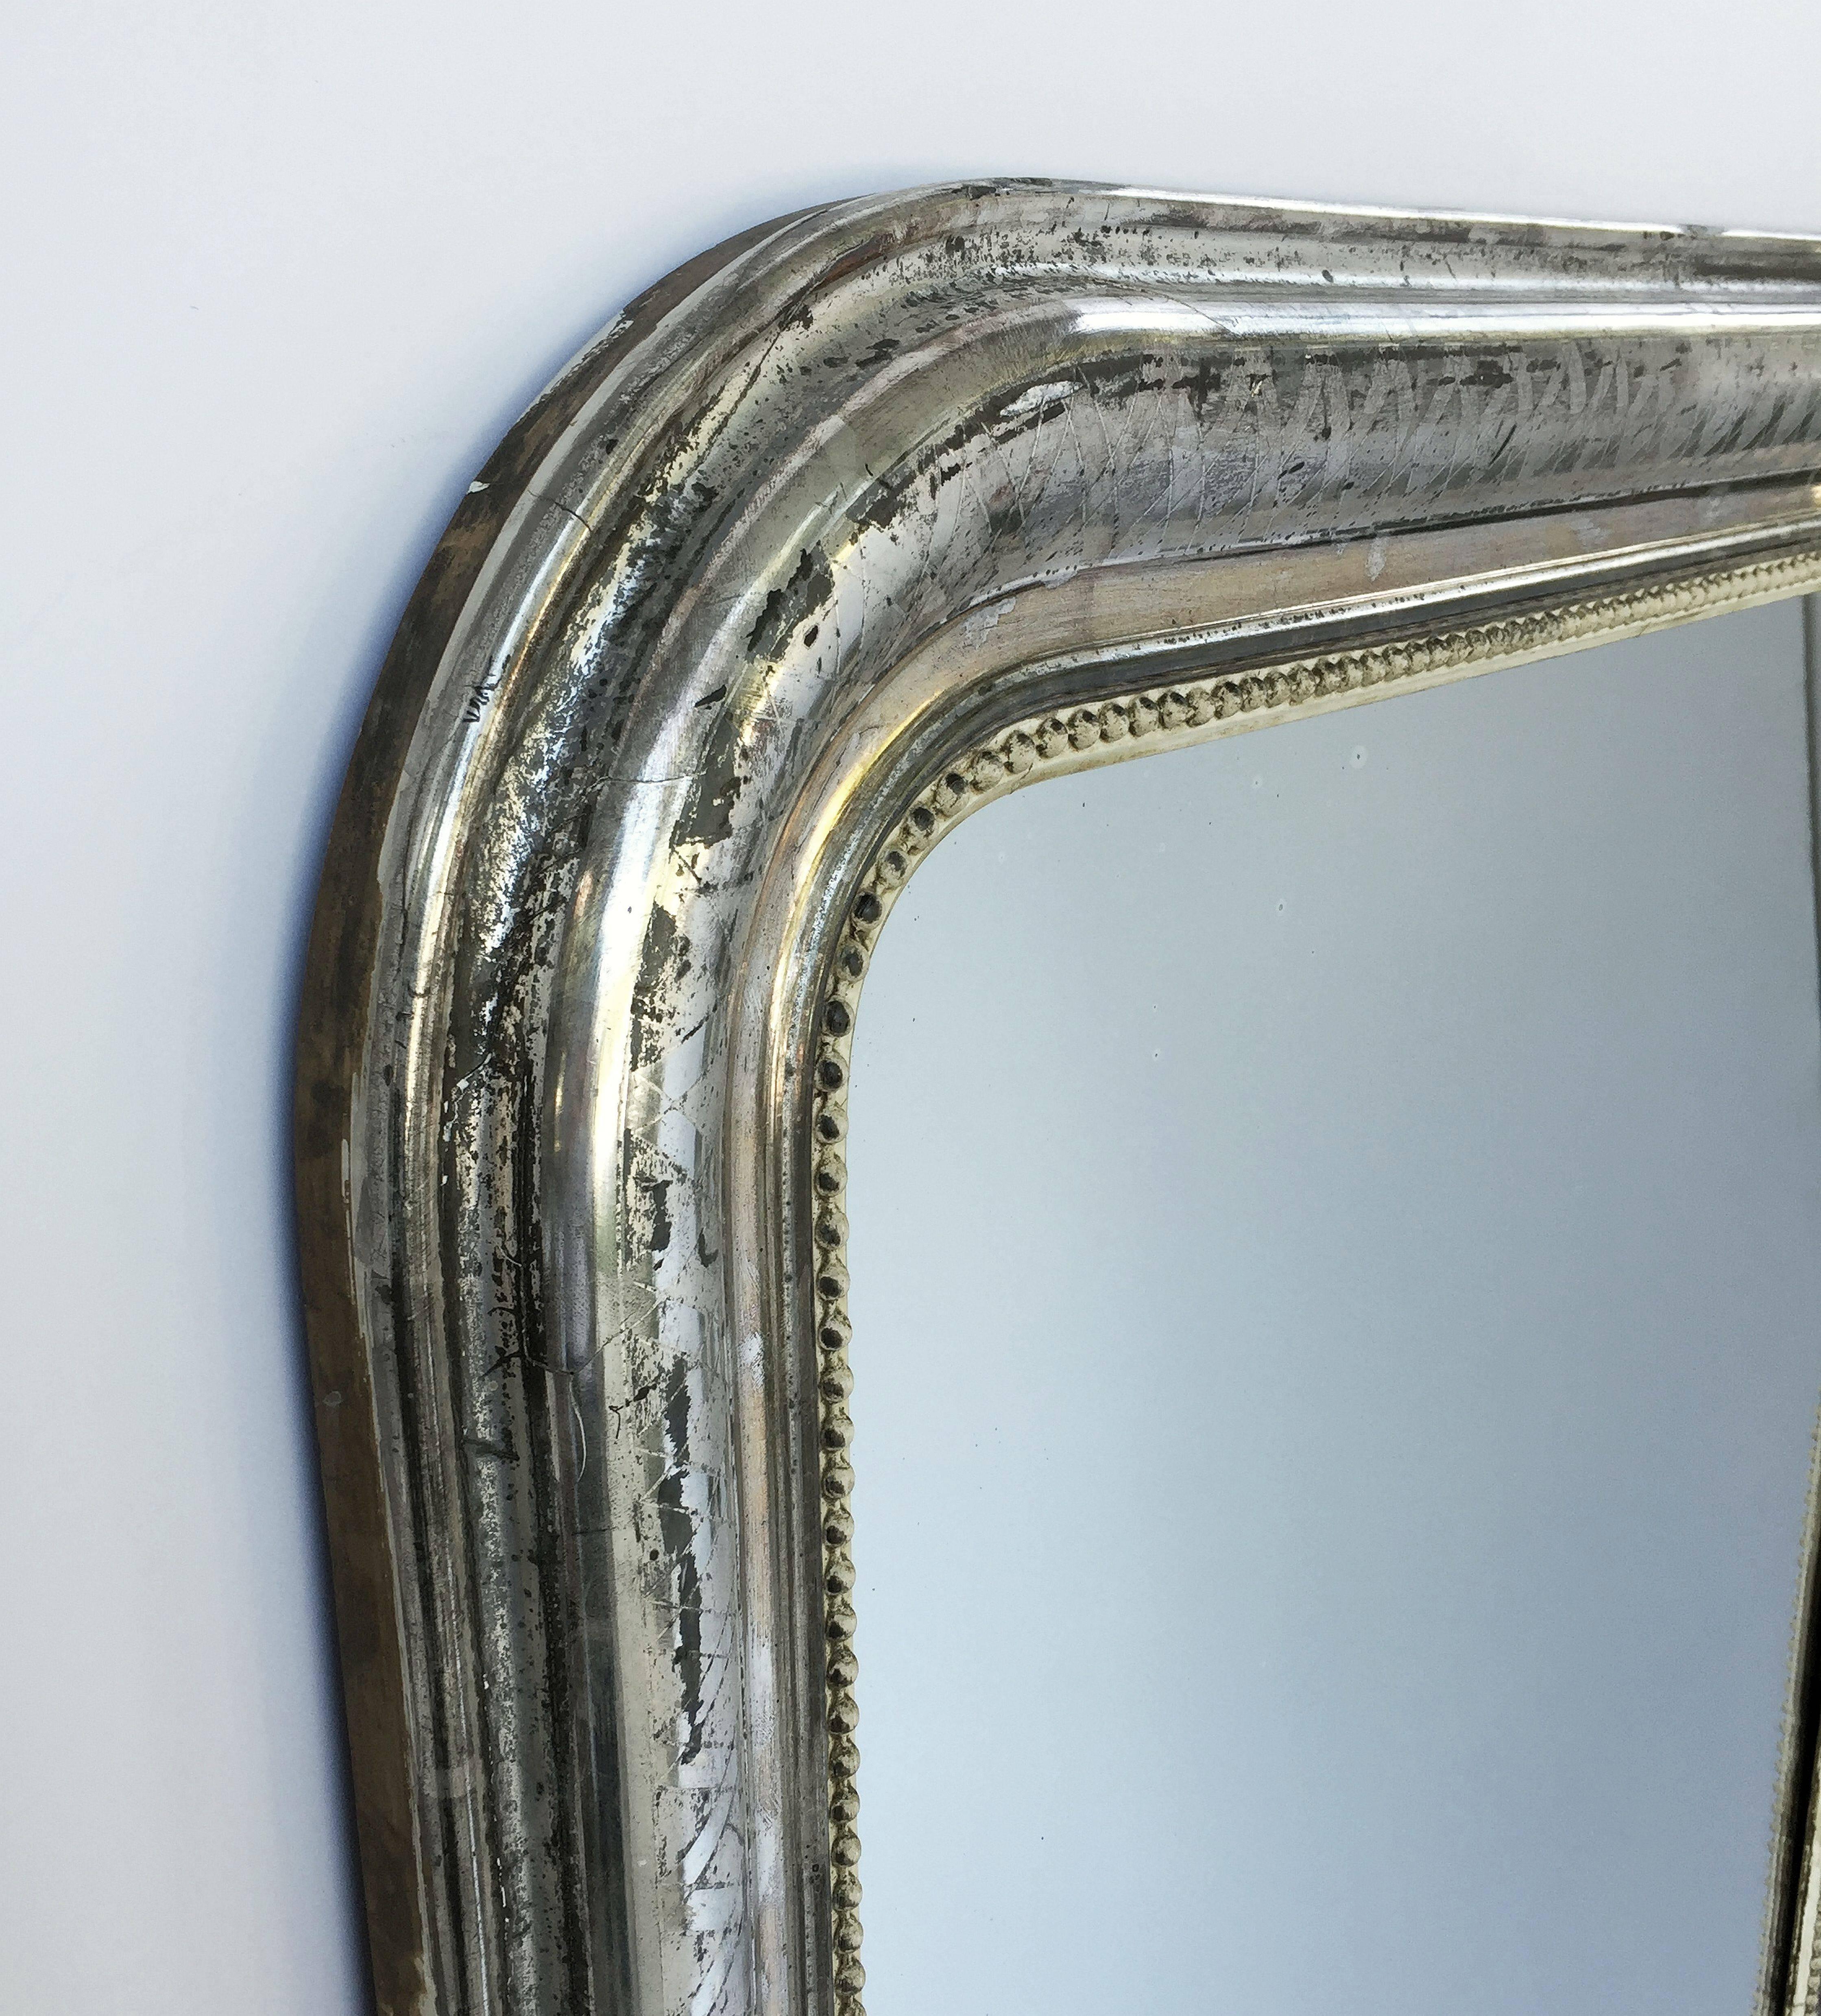 A fine Louis Philippe wall mirror from France, featuring a moulded surround with a beautiful patinated silver-leaf.

Dimensions: H 55 inches x W 34 inches

Other sizes available in this style.